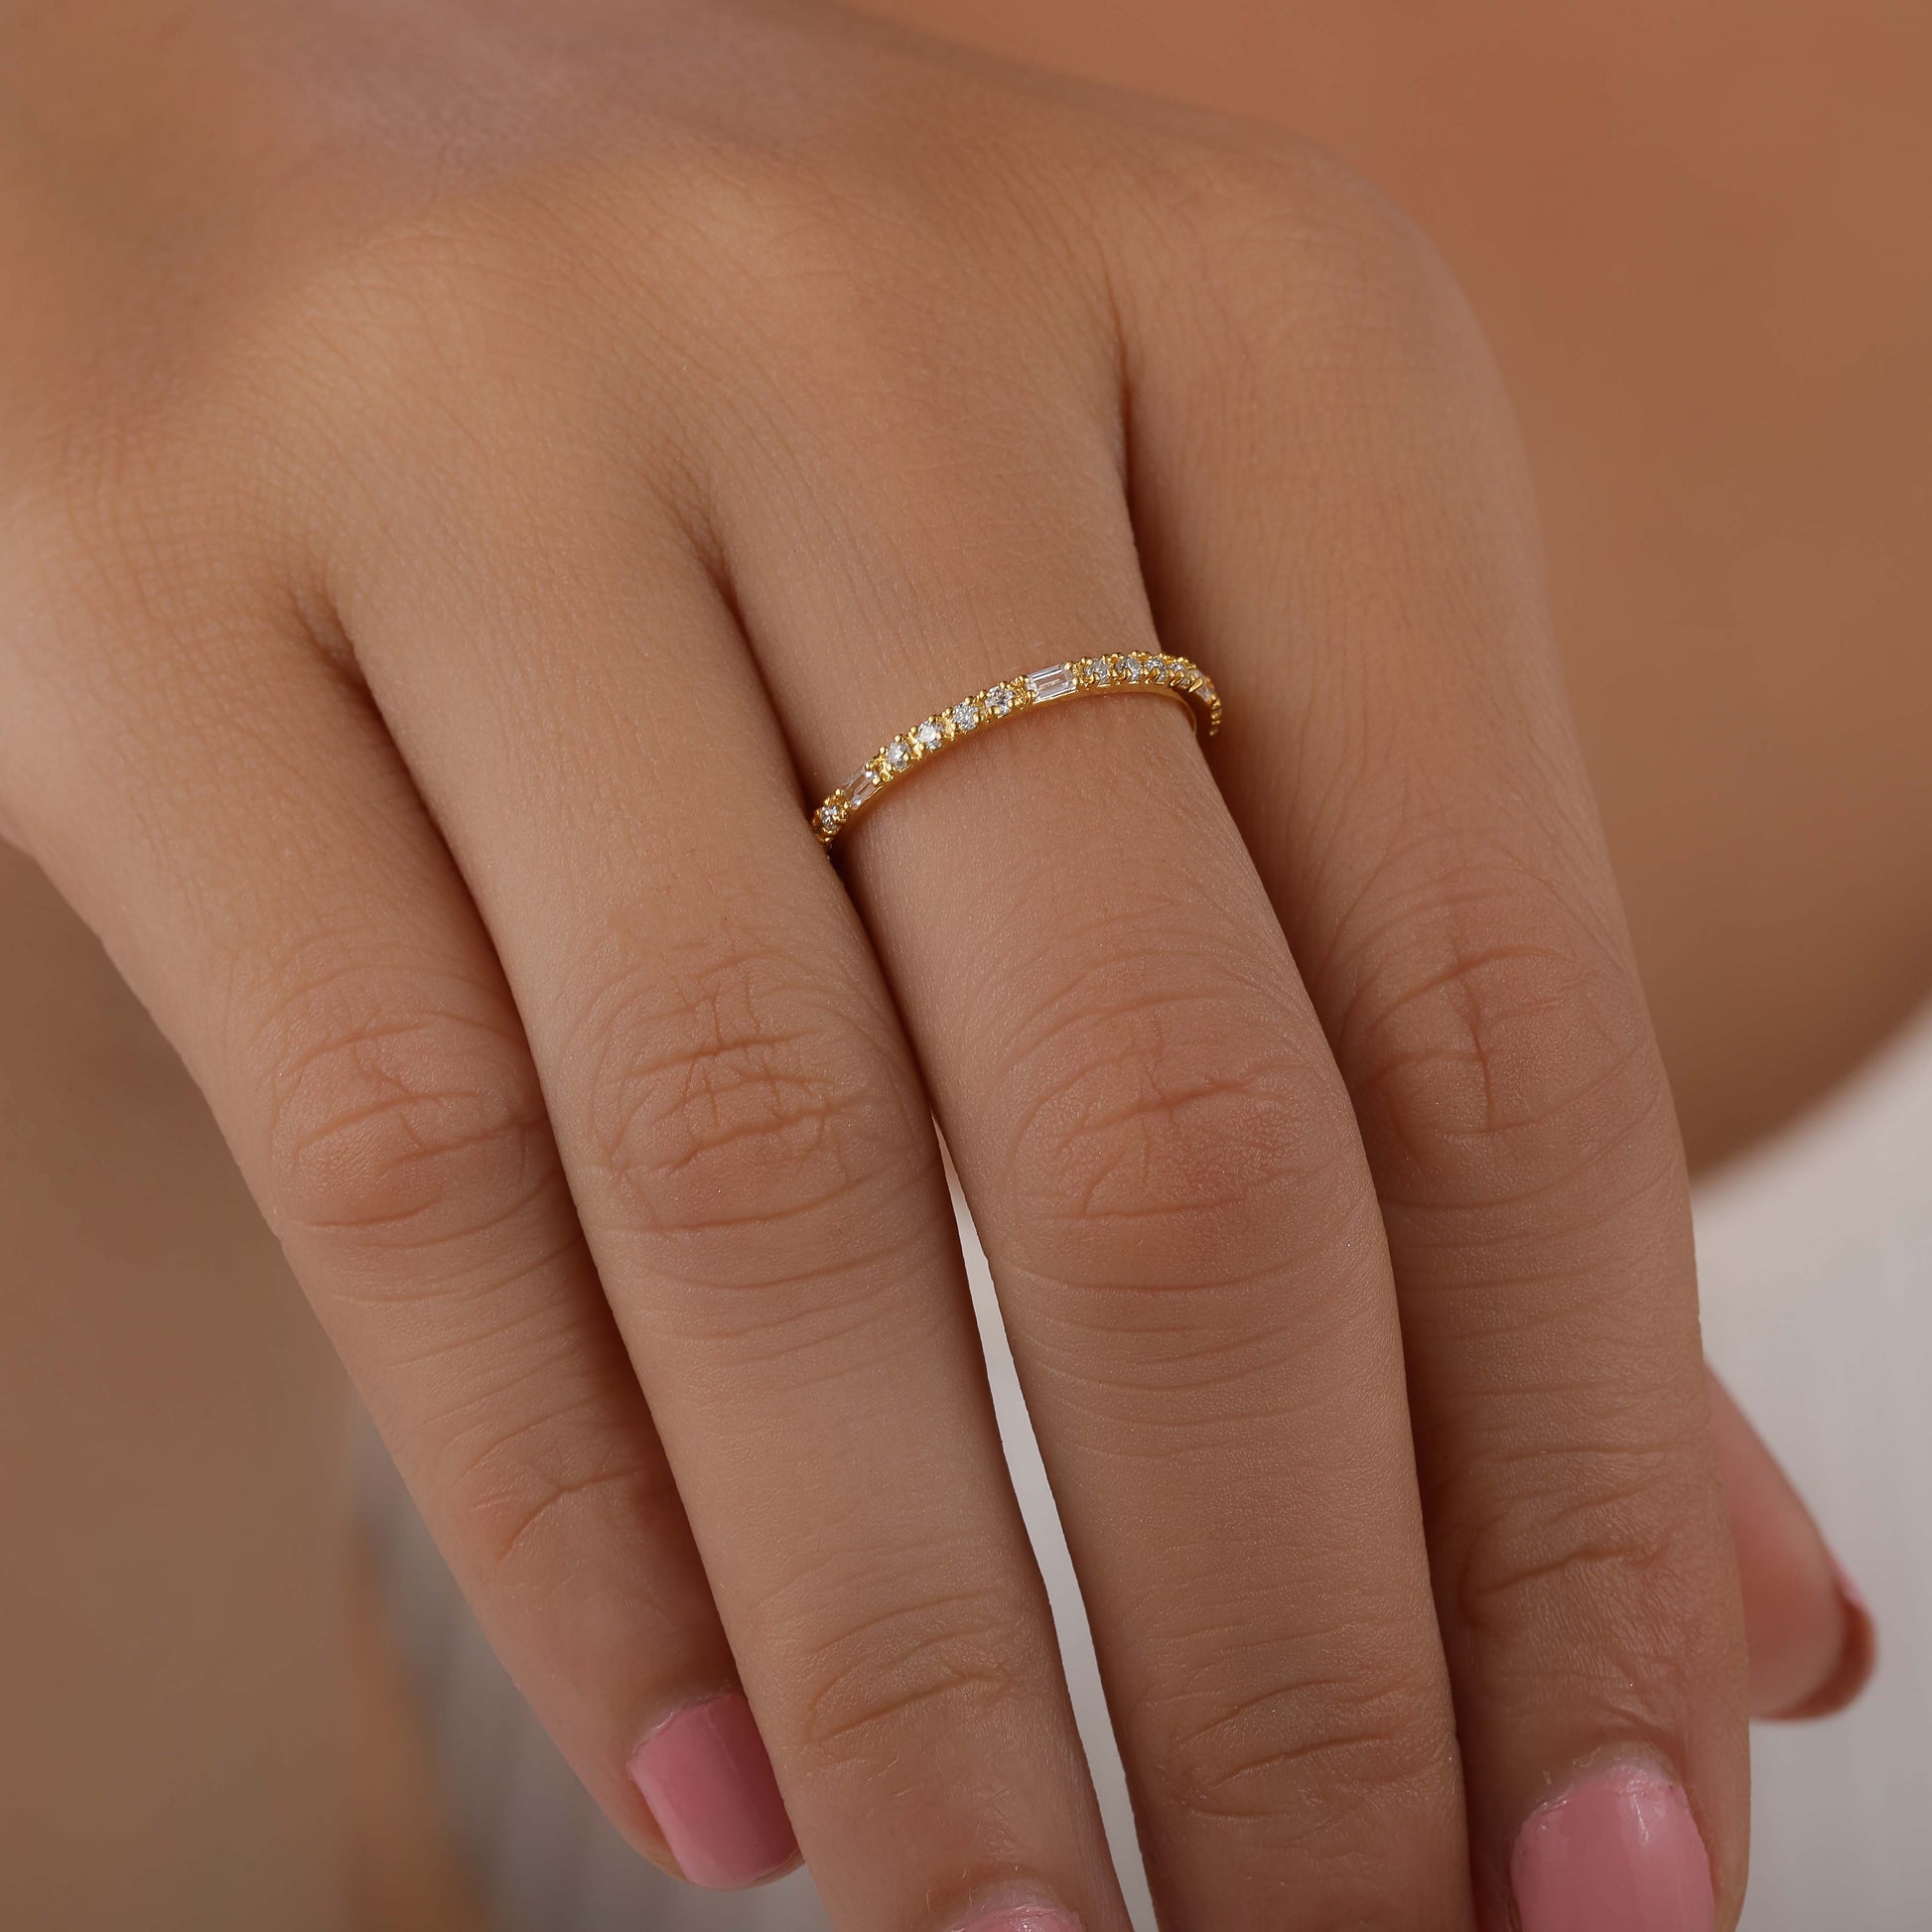 Glowing Solid Yellow Gold Baguette Diamond Ring